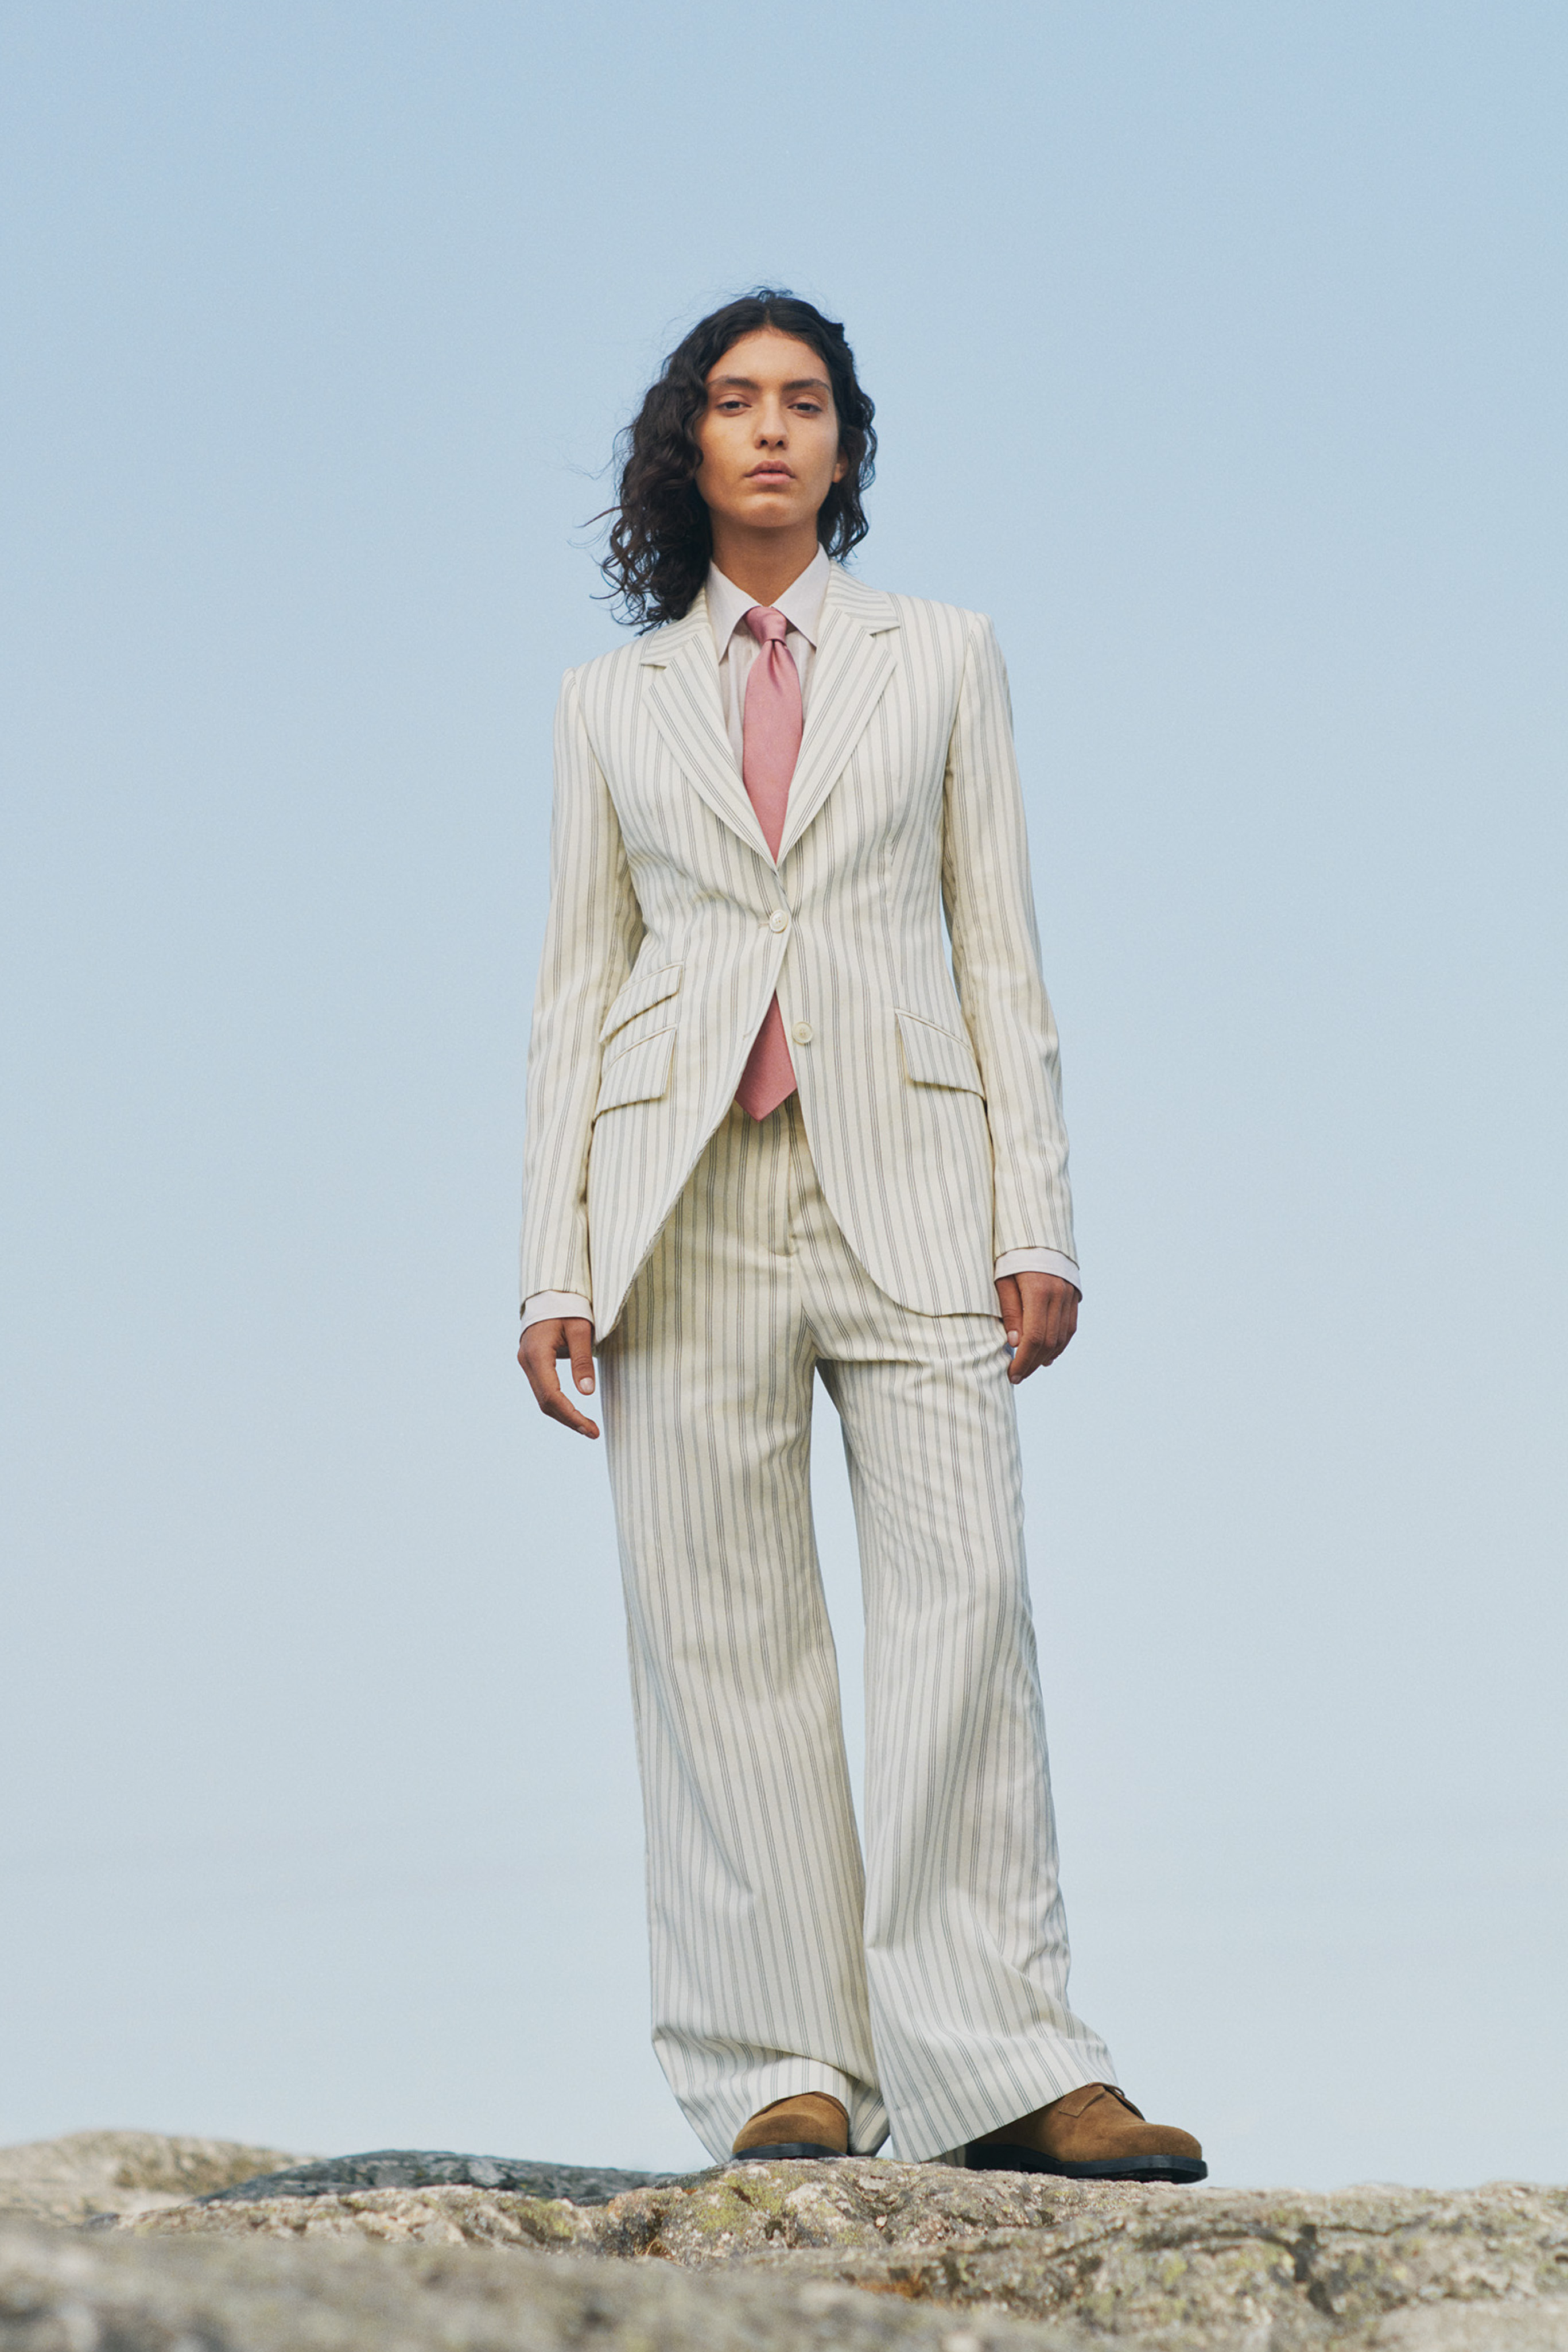 Model wearing a stripe suit from Tiger of Sweden